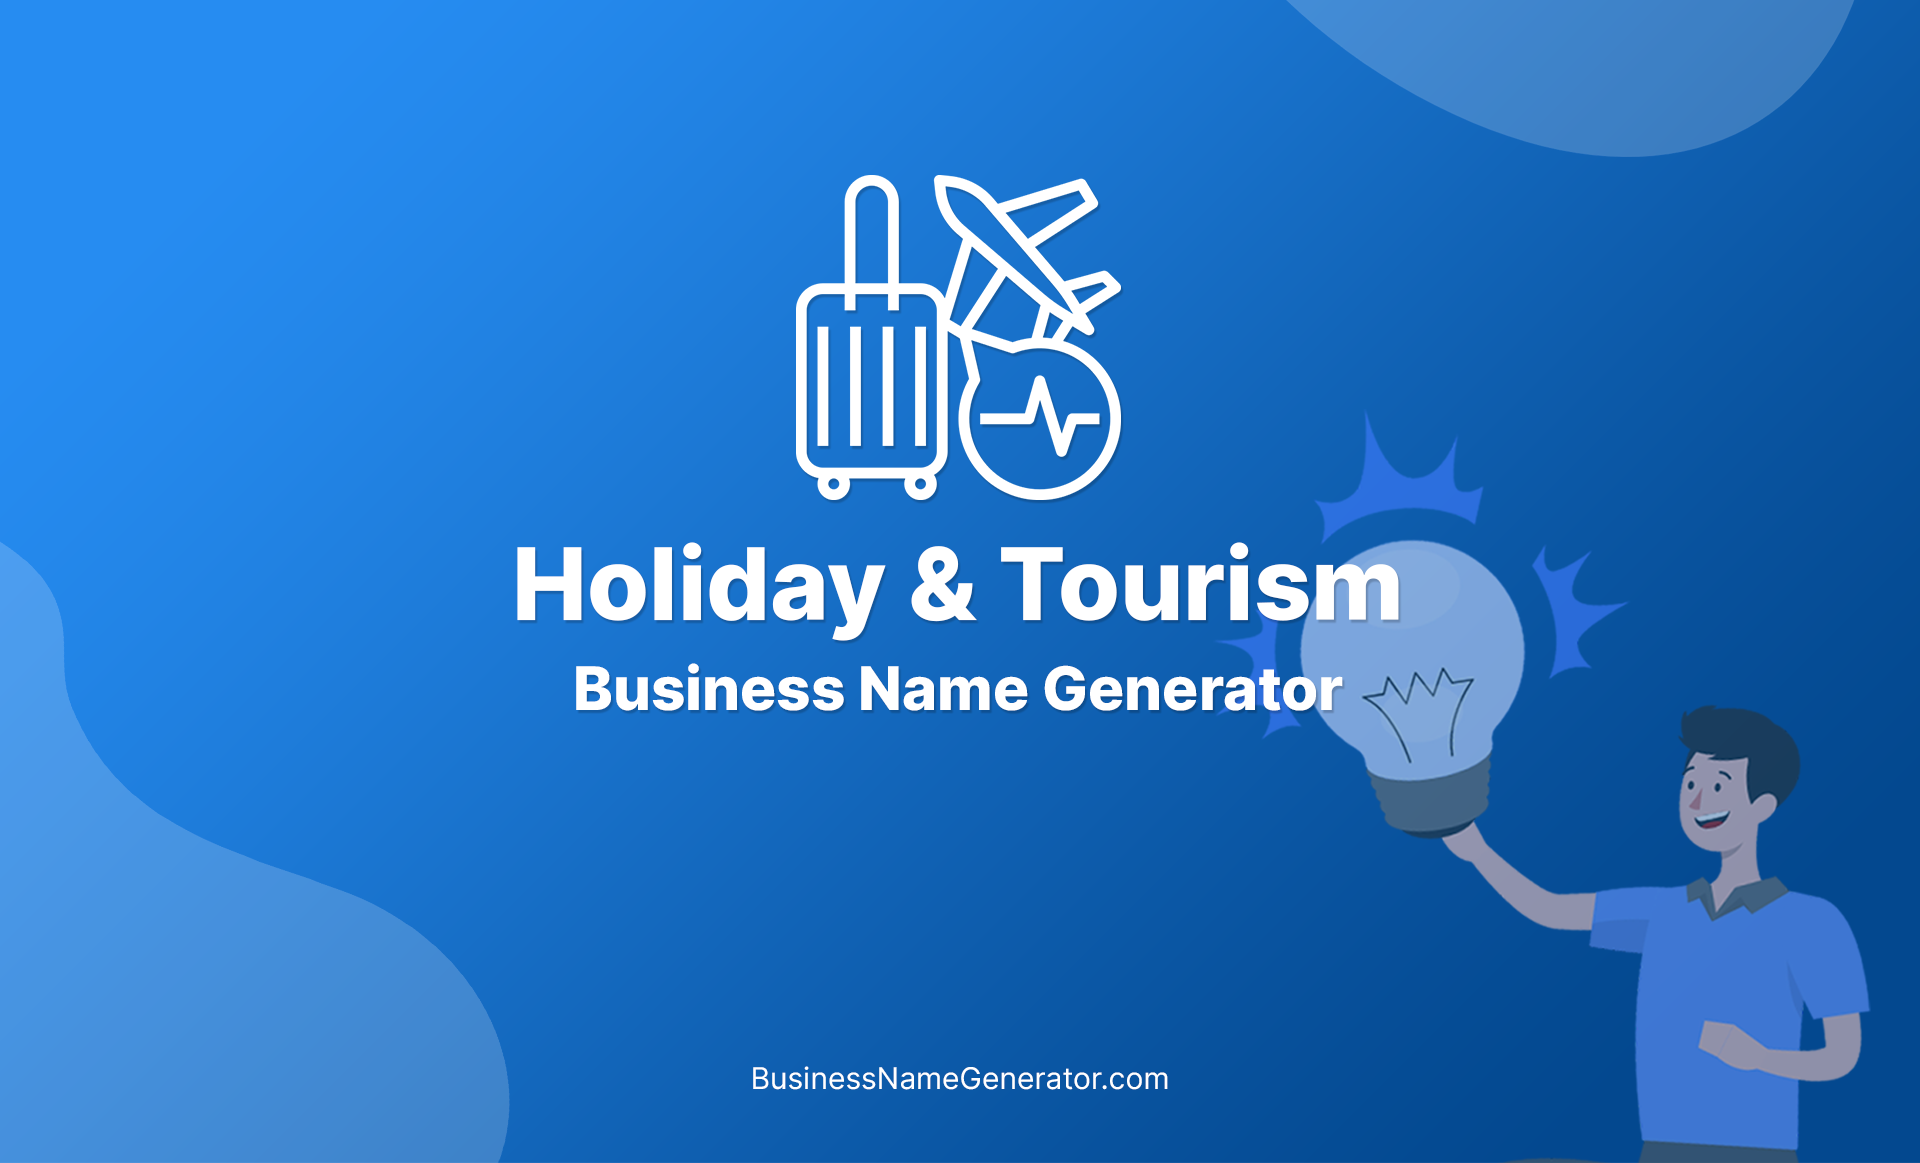 Holiday & Tourism Business Name Generator